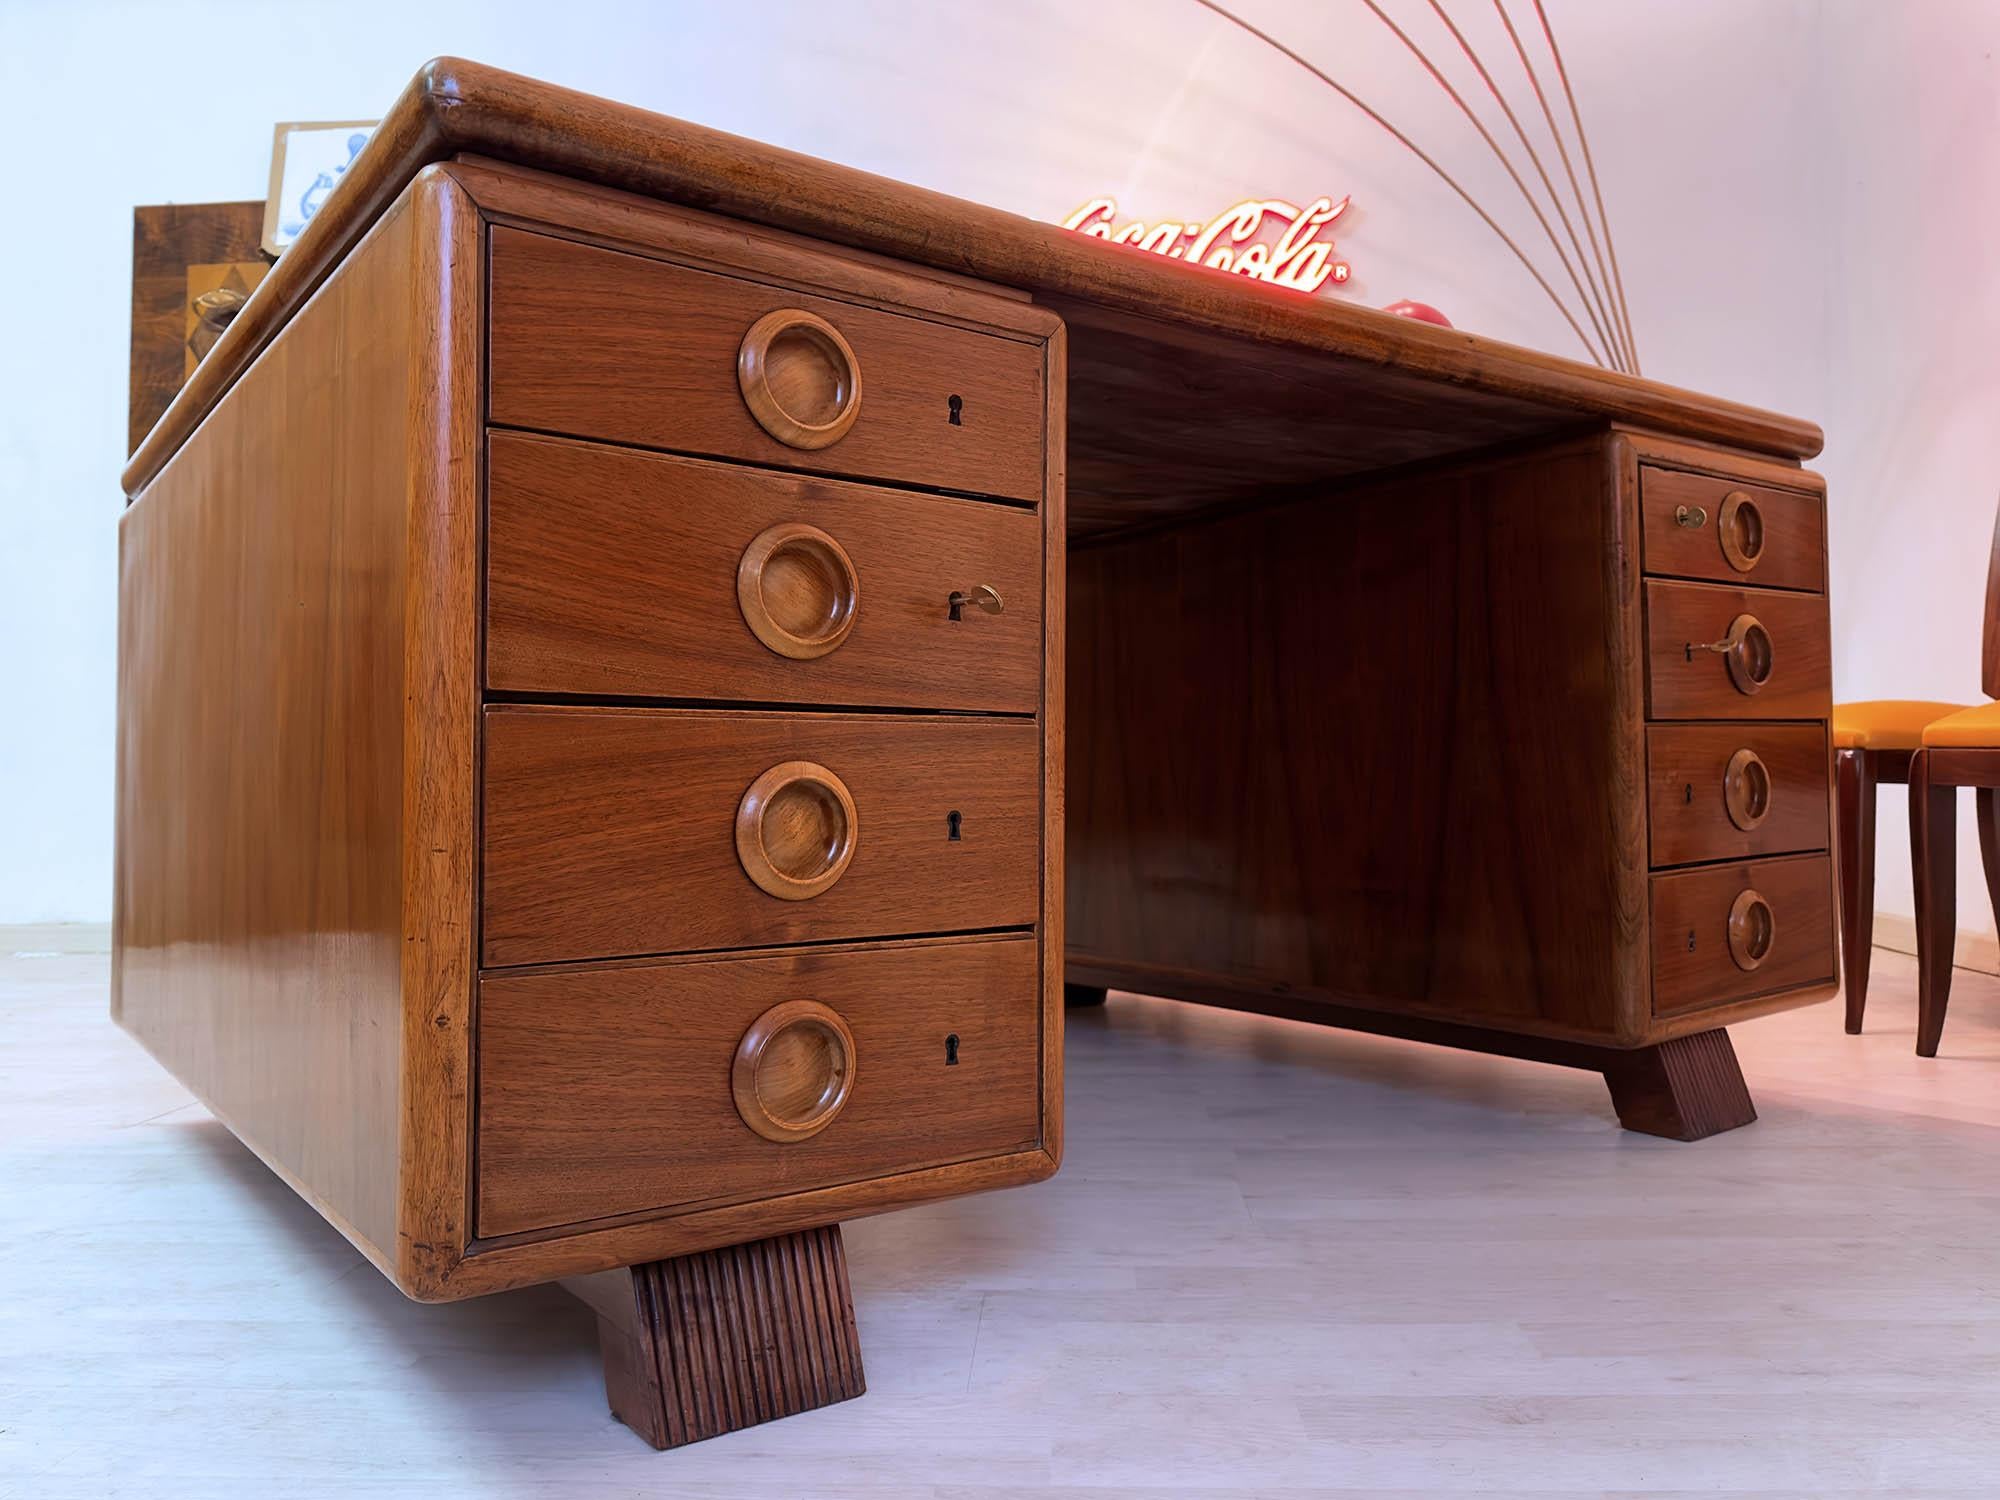 Stunning Italian double-sided desk of the 1950s, attributable to the design of Paolo Buffa.
It’s equipped with eight drawers per side, all lockable, and it’s in very good condition of the period, as all wood surfaces have been recently polished with